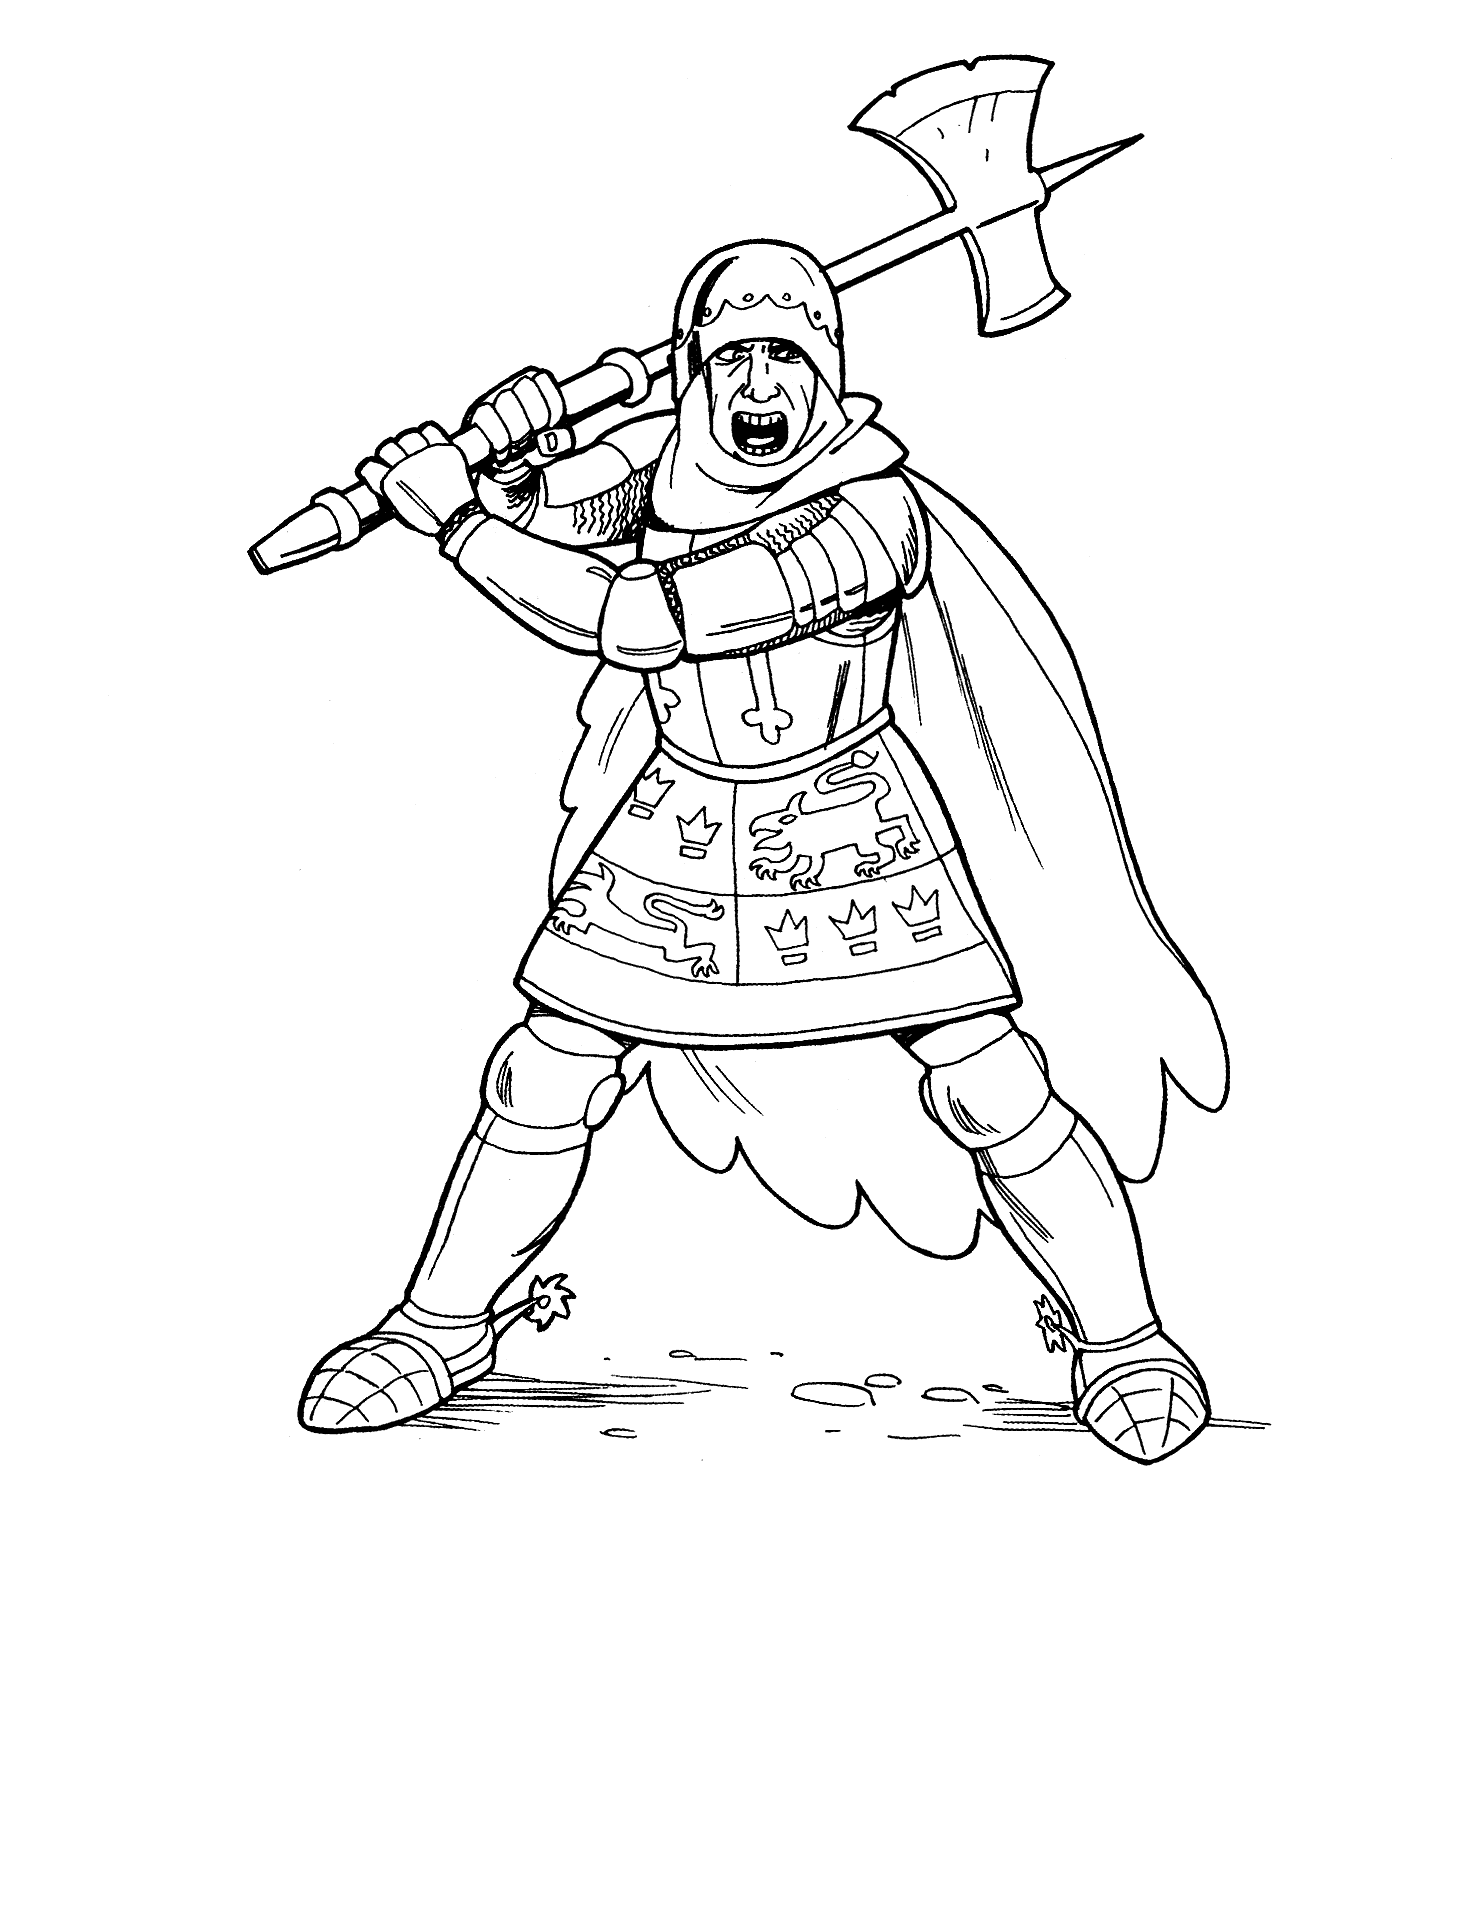 Free Knight Coloring Page - Coloring Home